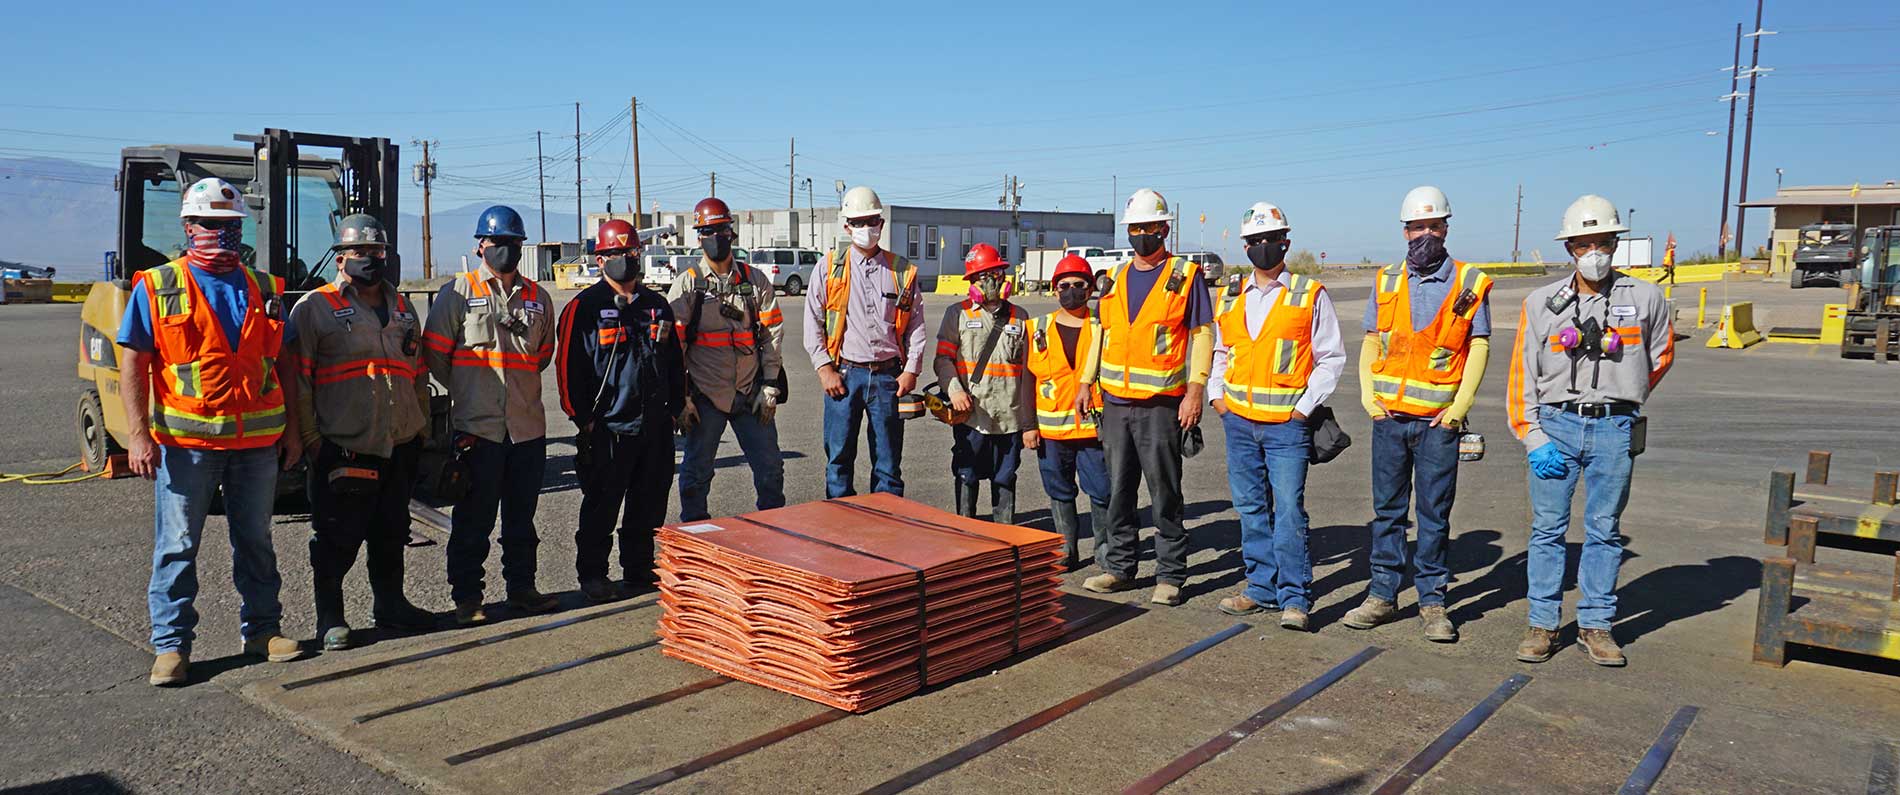 Members of Safford’s Hydromet team surround a stack of freshly bundled copper cathode on September 30, 2020, the day that the site harvested its 2 billionth pound.